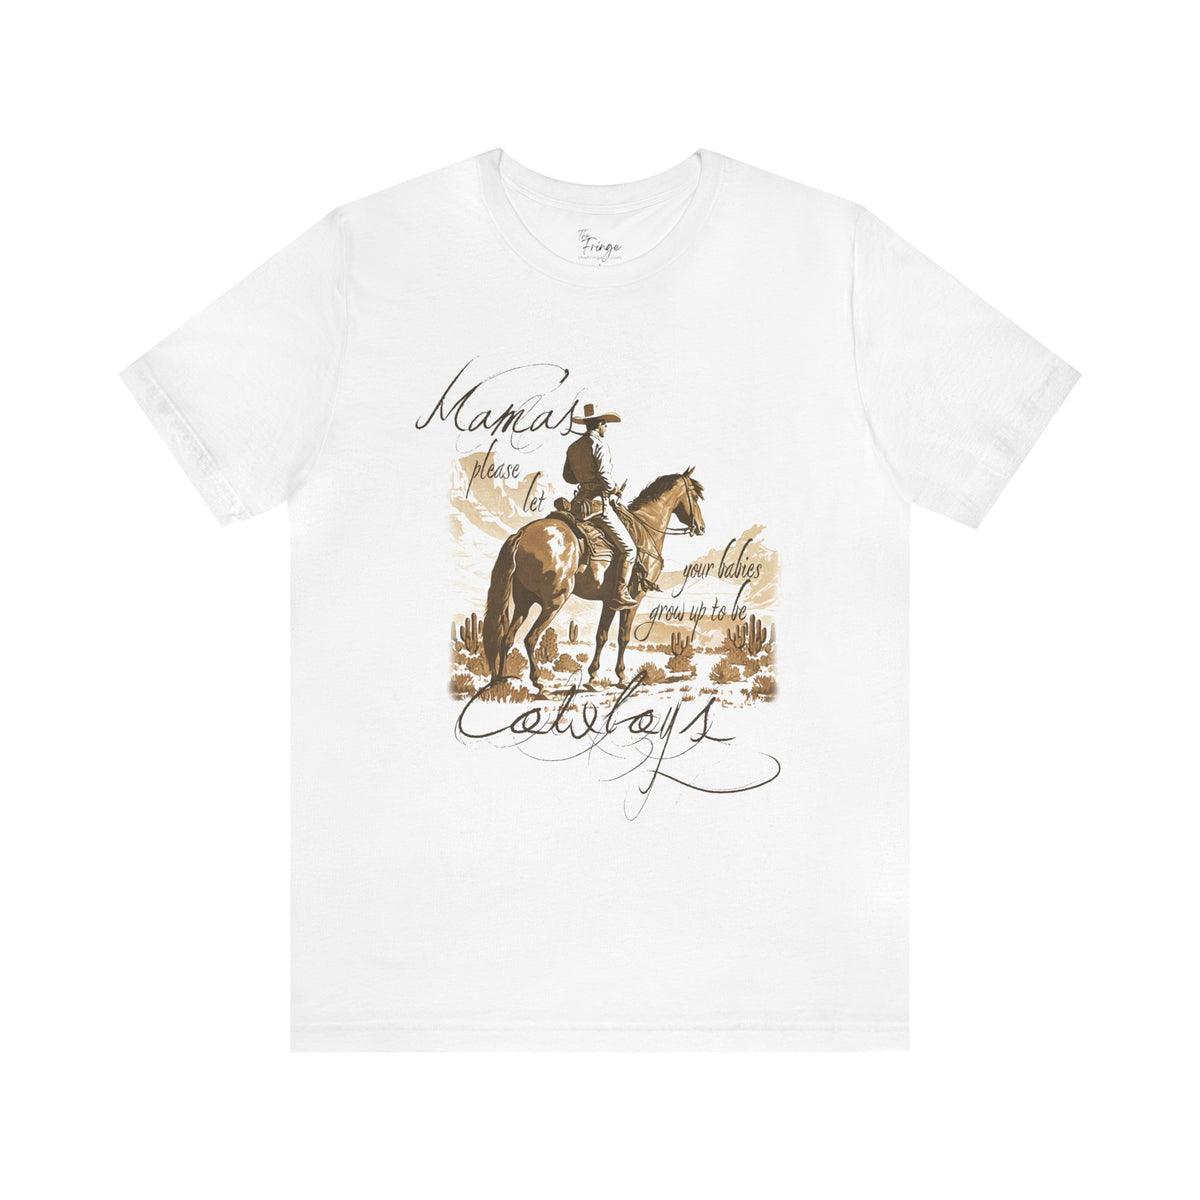 Mama's Please Let Your Babies Grow up to Cowboys Western Graphic T-shirt | Country Graphic Tee | Western T-shirt